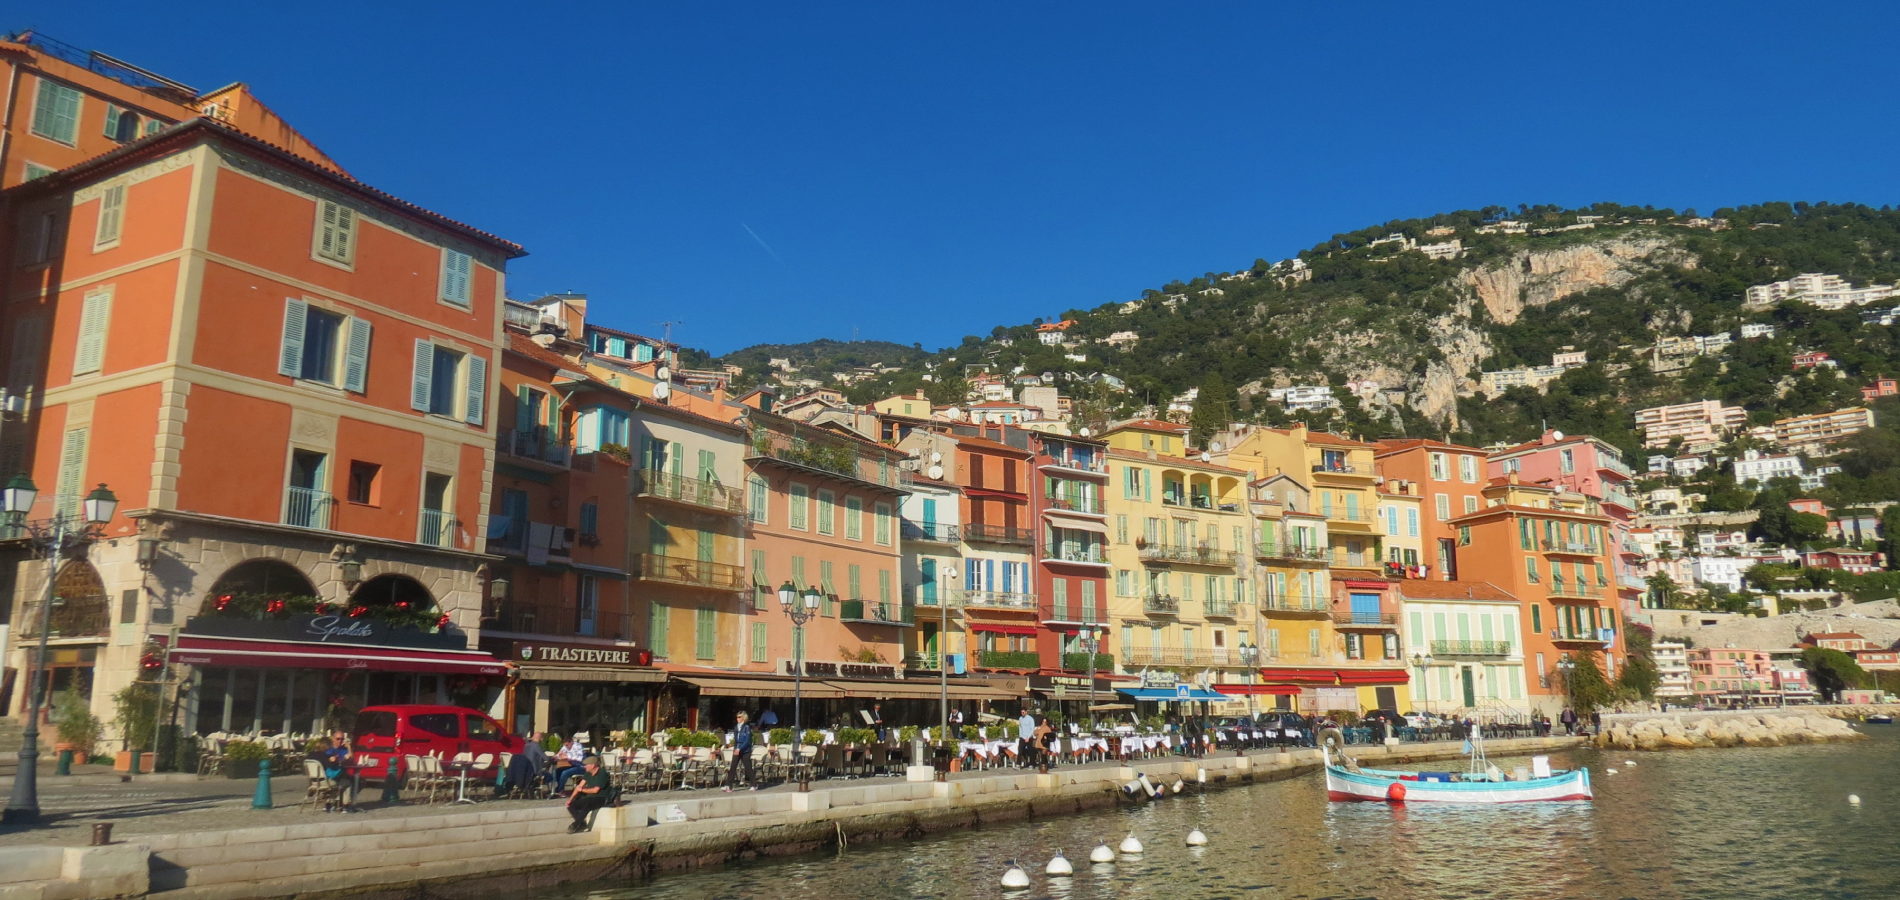 Guided walking tours of Villefranche-sur-Mer